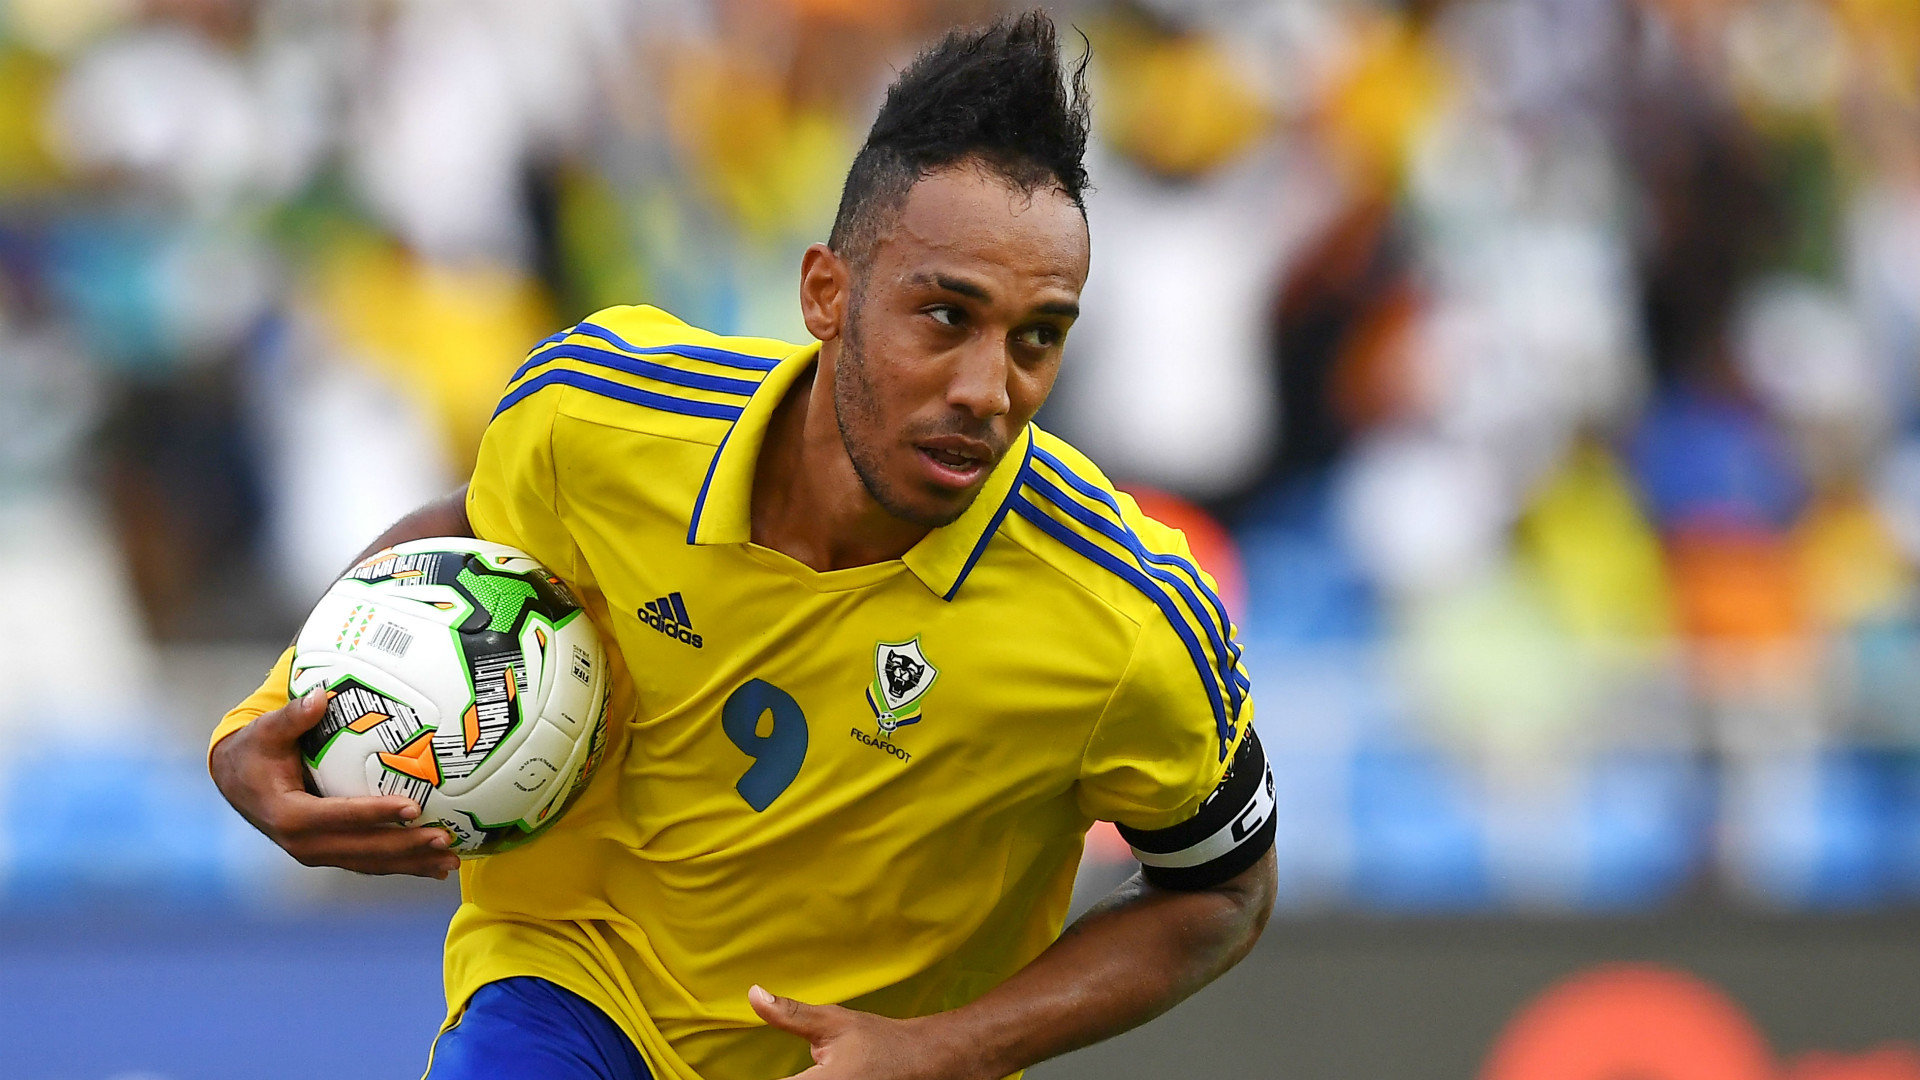 2022 World Cup qualifiers: Aubameyang on target as Gabon grab first win while Cameroon eliminate Mozambique